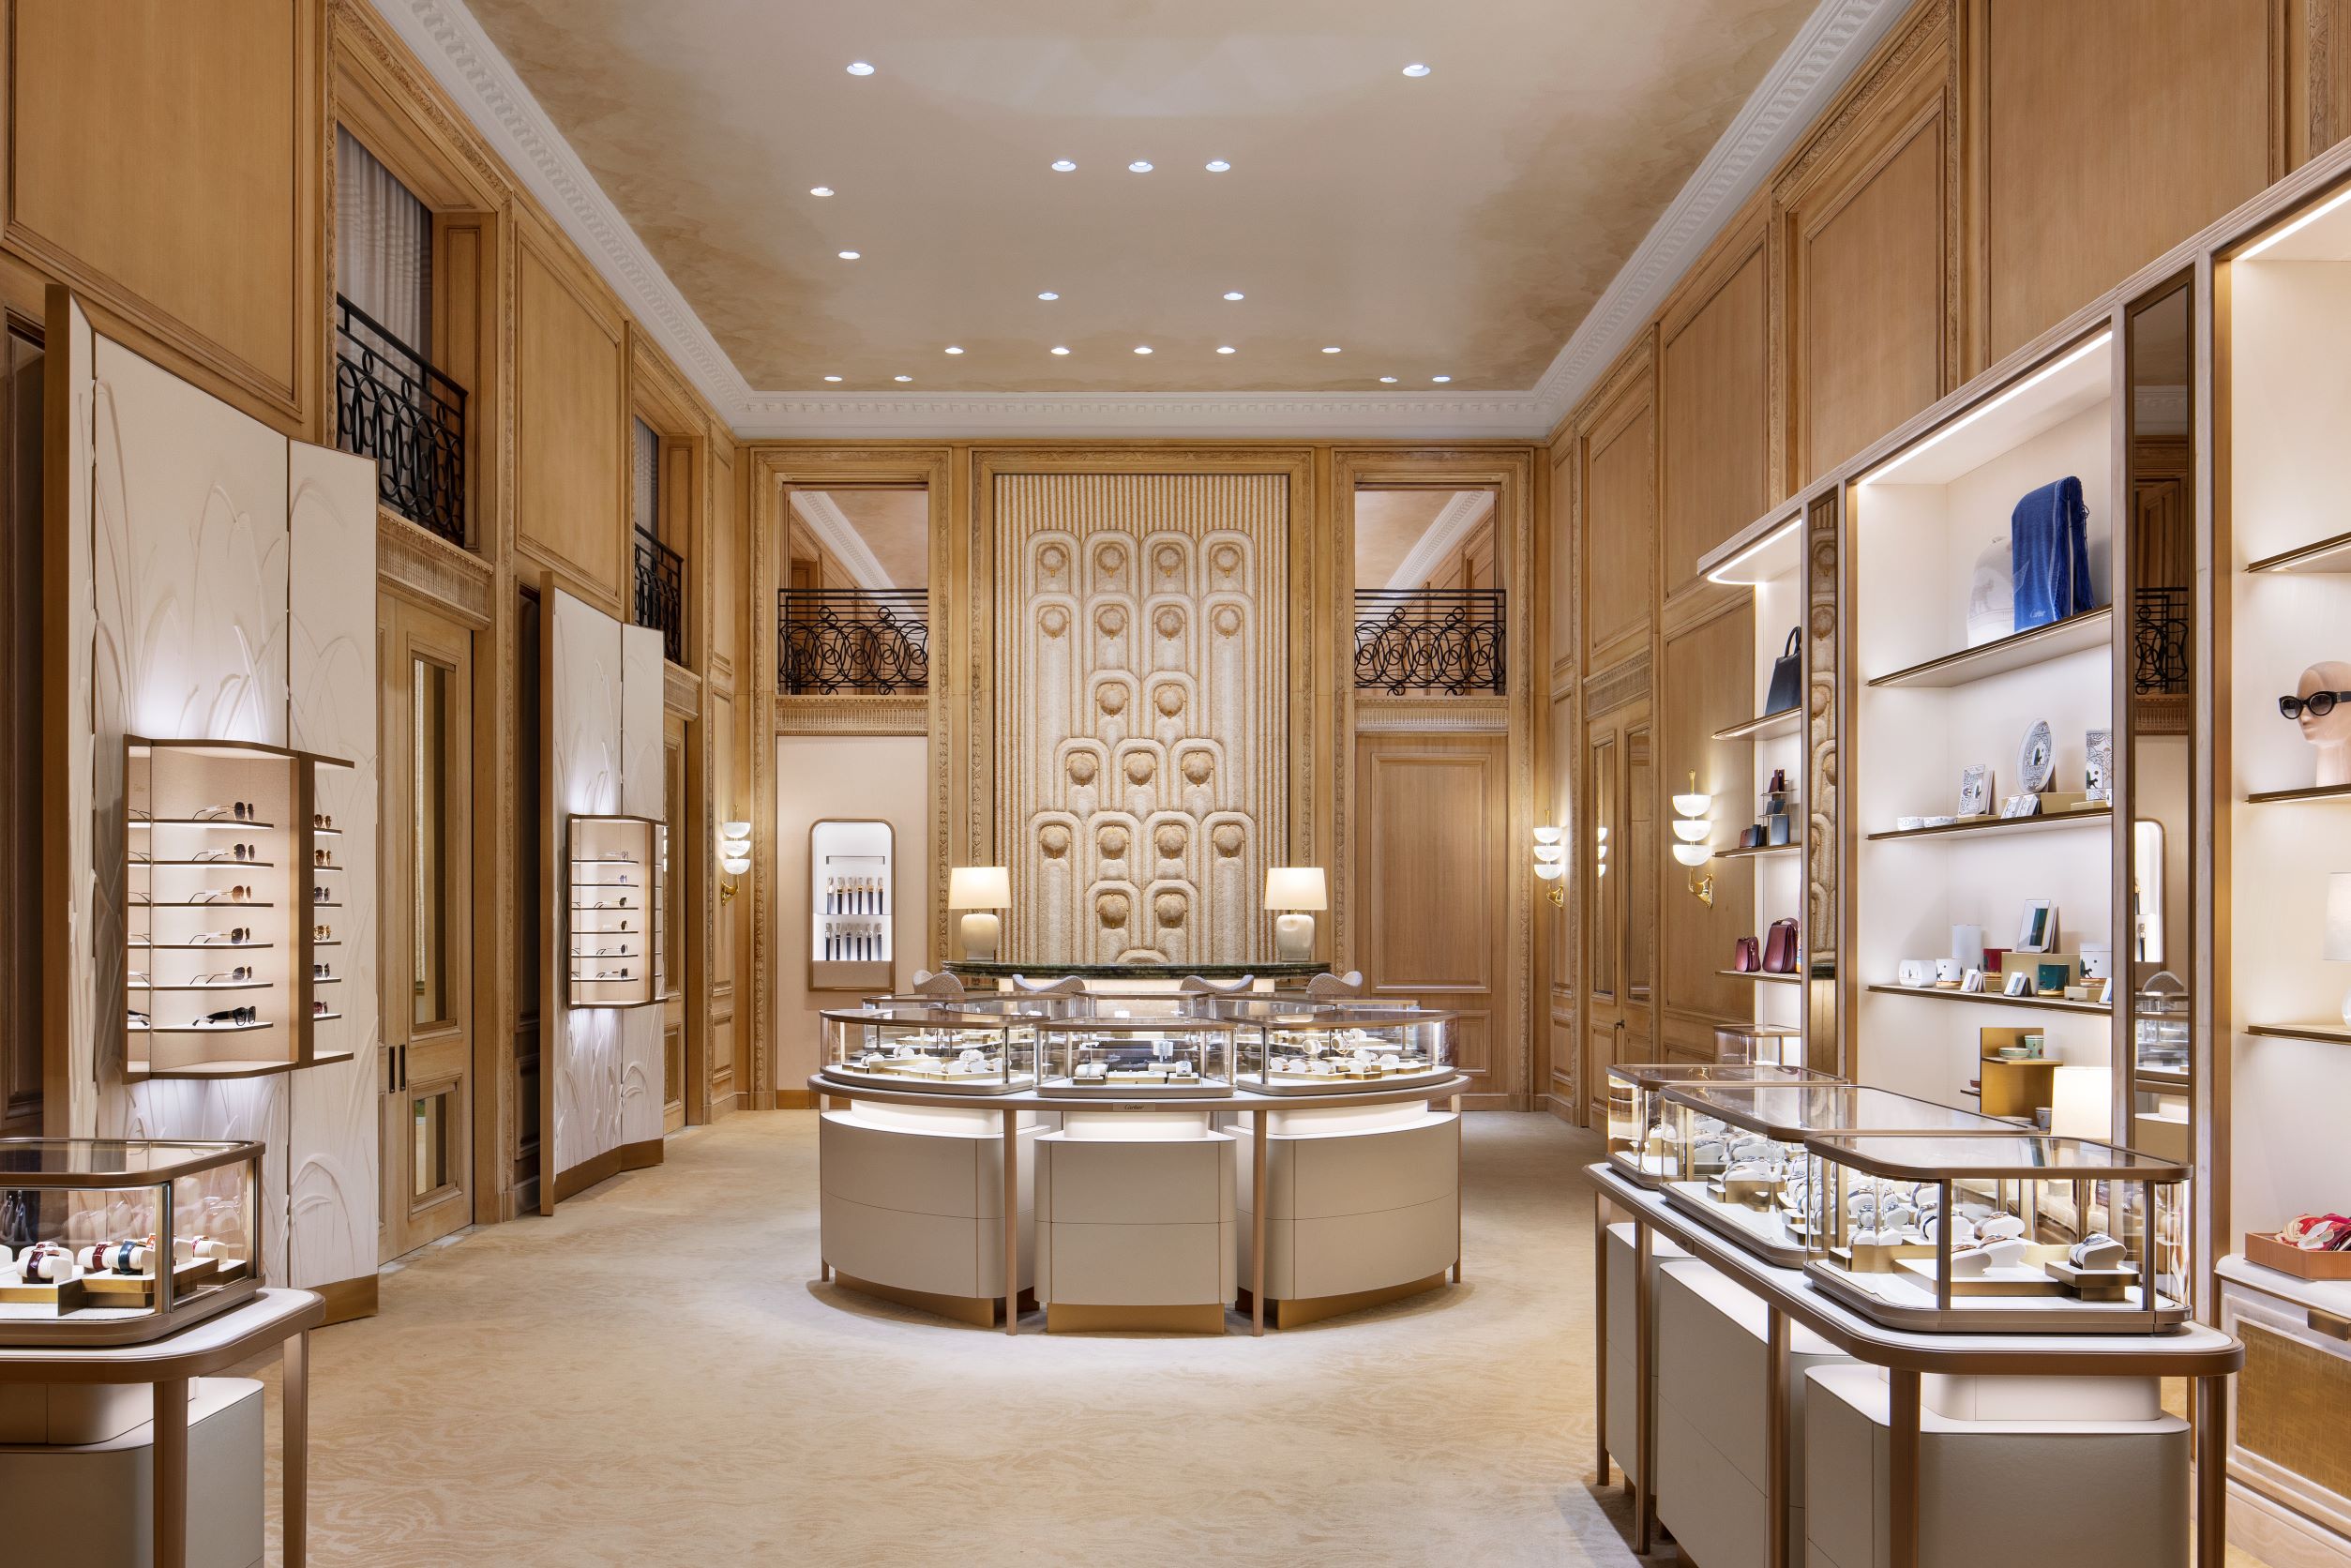 A First Look Inside the Cartier Mansion - Photos of the Cartier